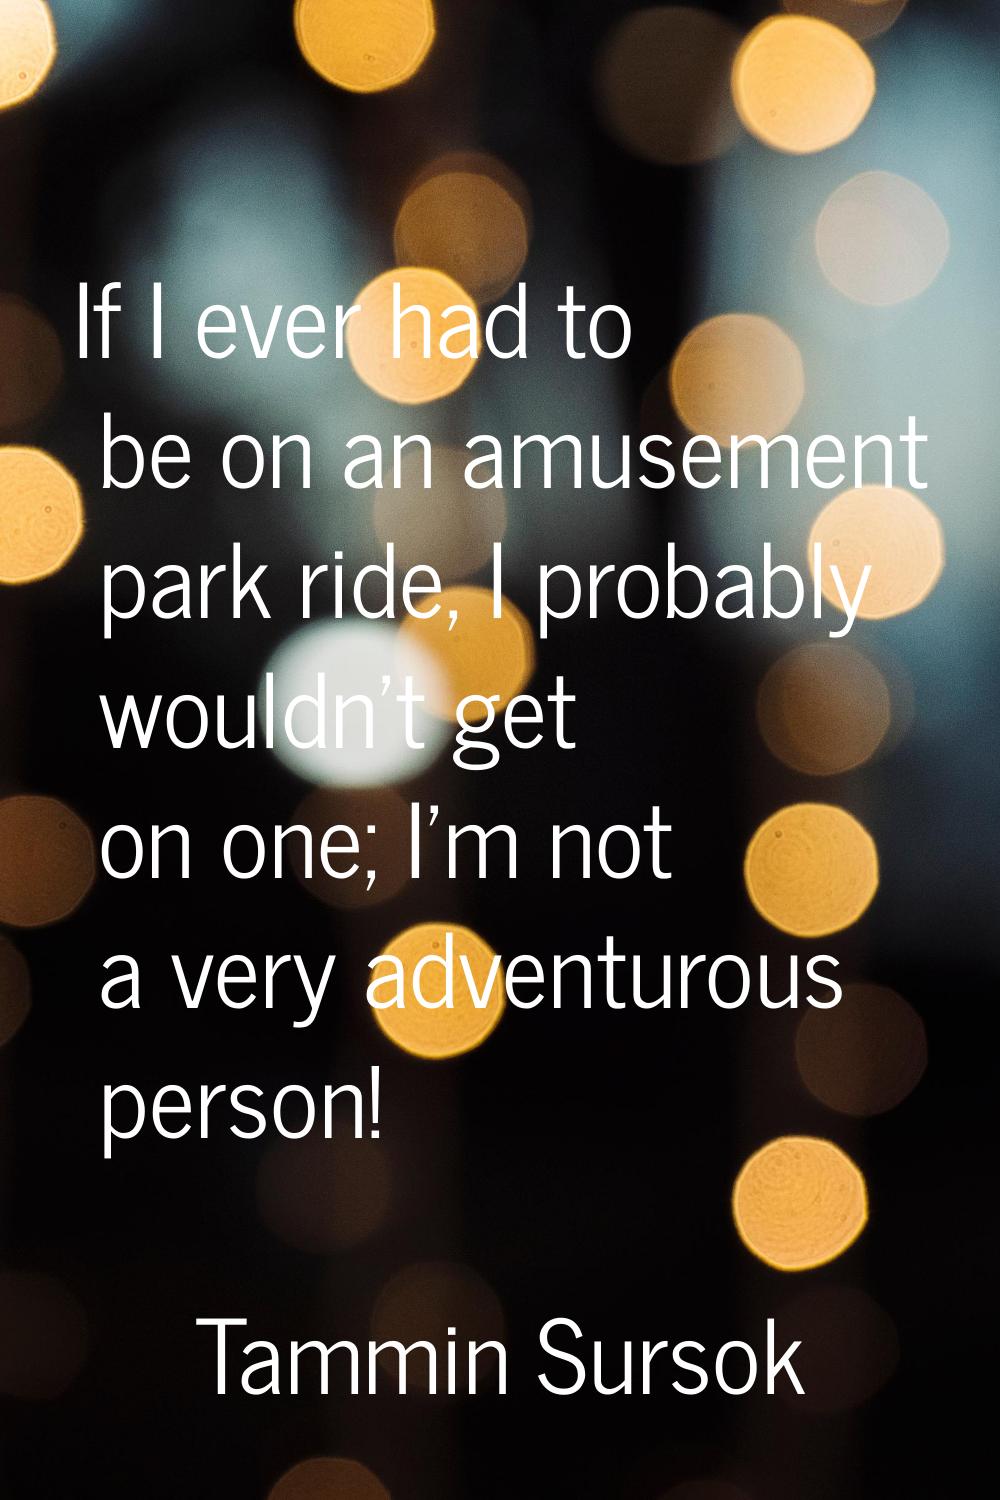 If I ever had to be on an amusement park ride, I probably wouldn't get on one; I'm not a very adven